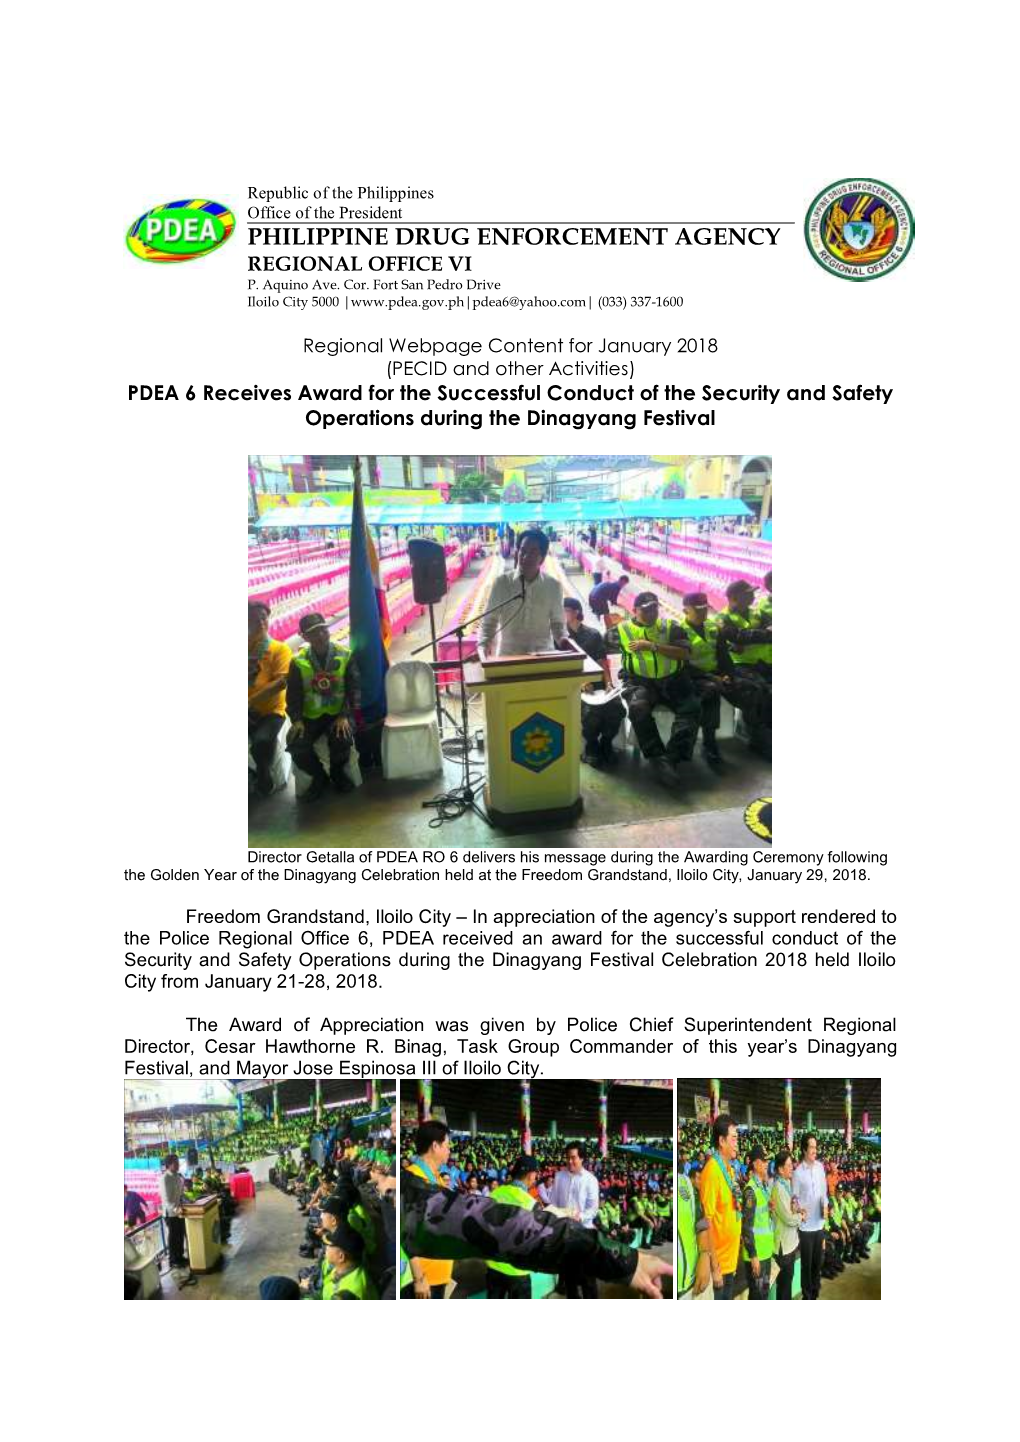 January 2018 (PECID and Other Activities) PDEA 6 Receives Award for the Successful Conduct of the Security and Safety Operations During the Dinagyang Festival